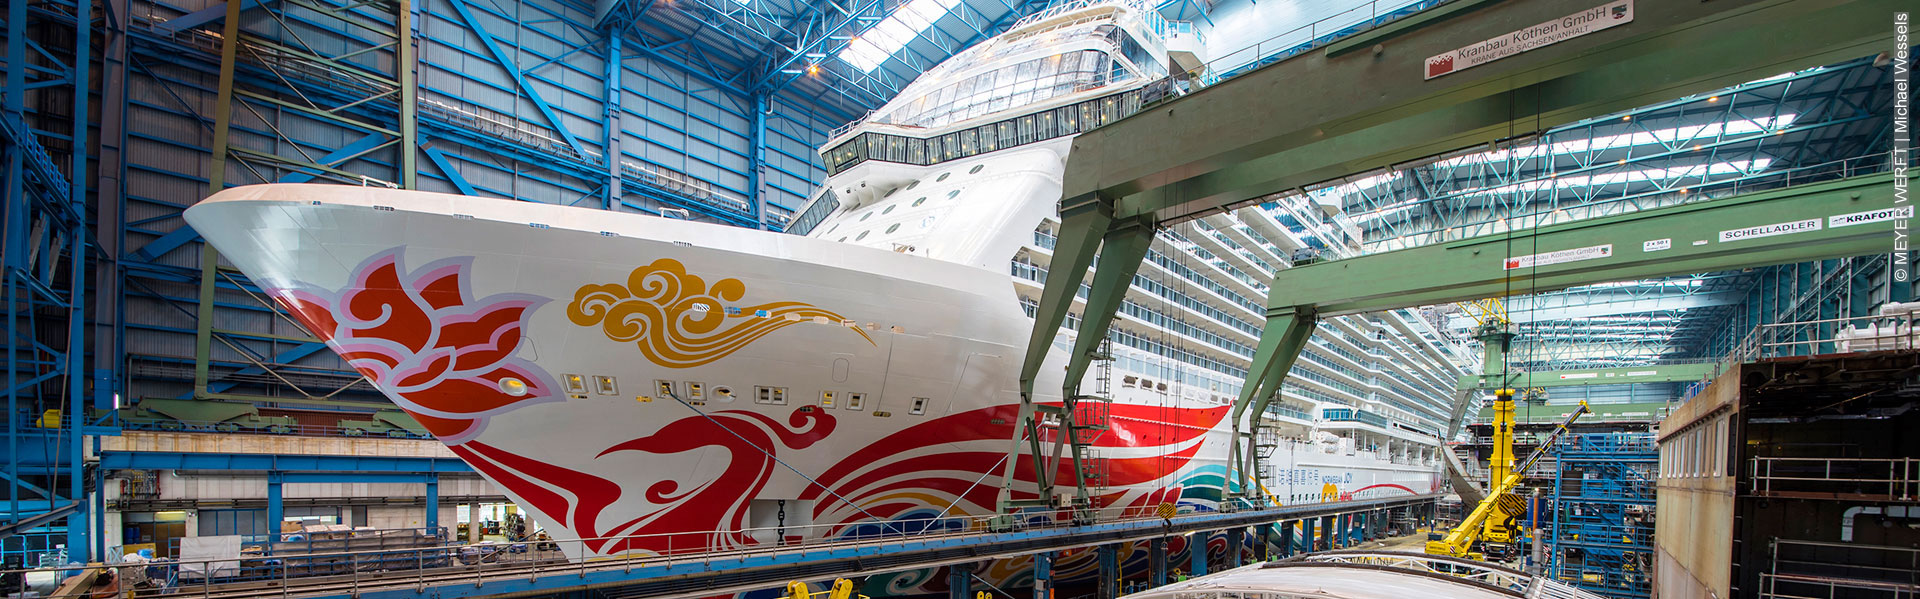 See how these cruiseships are build